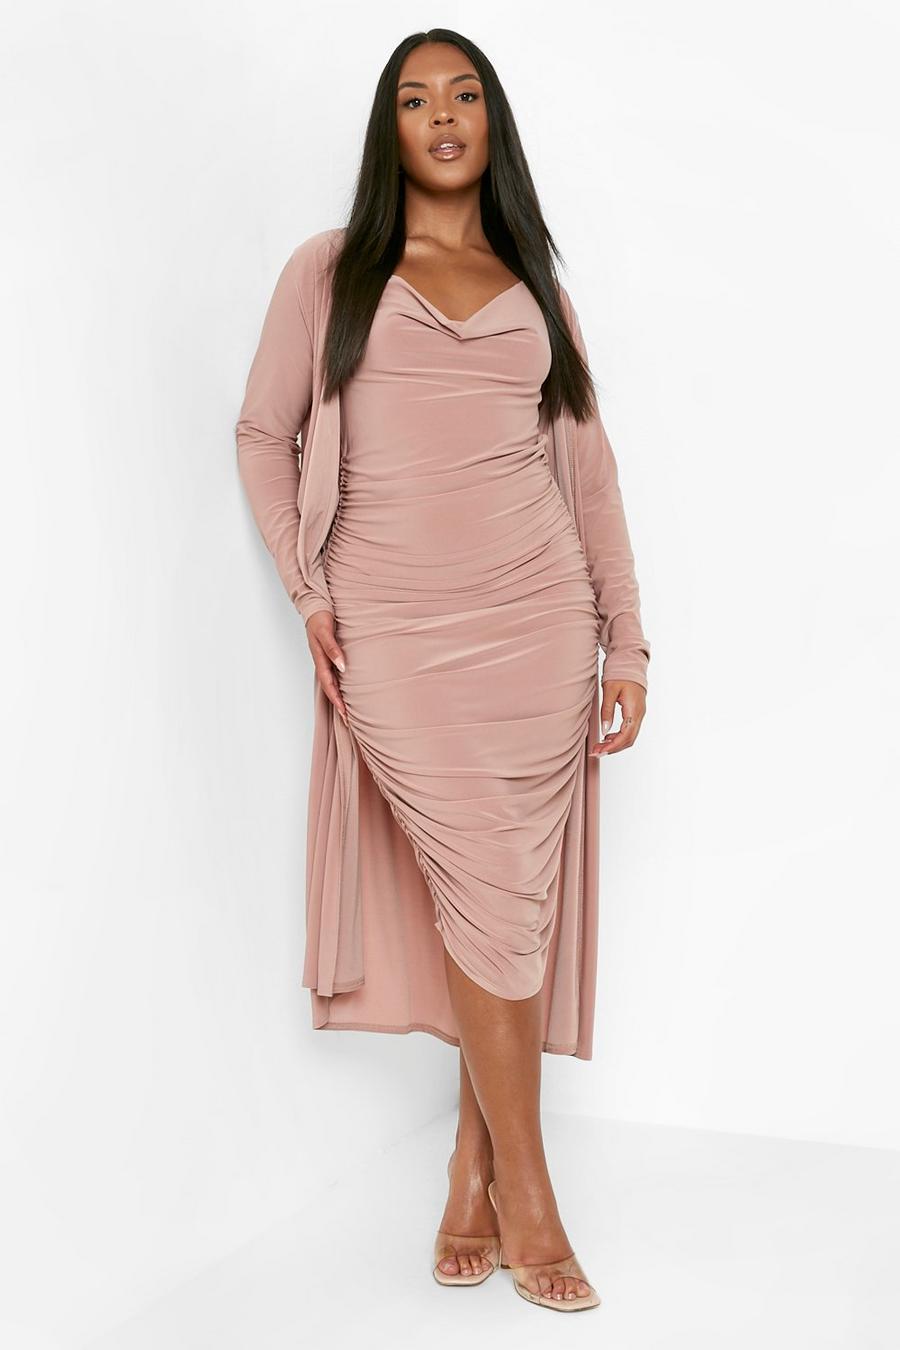 Plus Strappy Cowl Neck Dress & Two-Piece boohoo